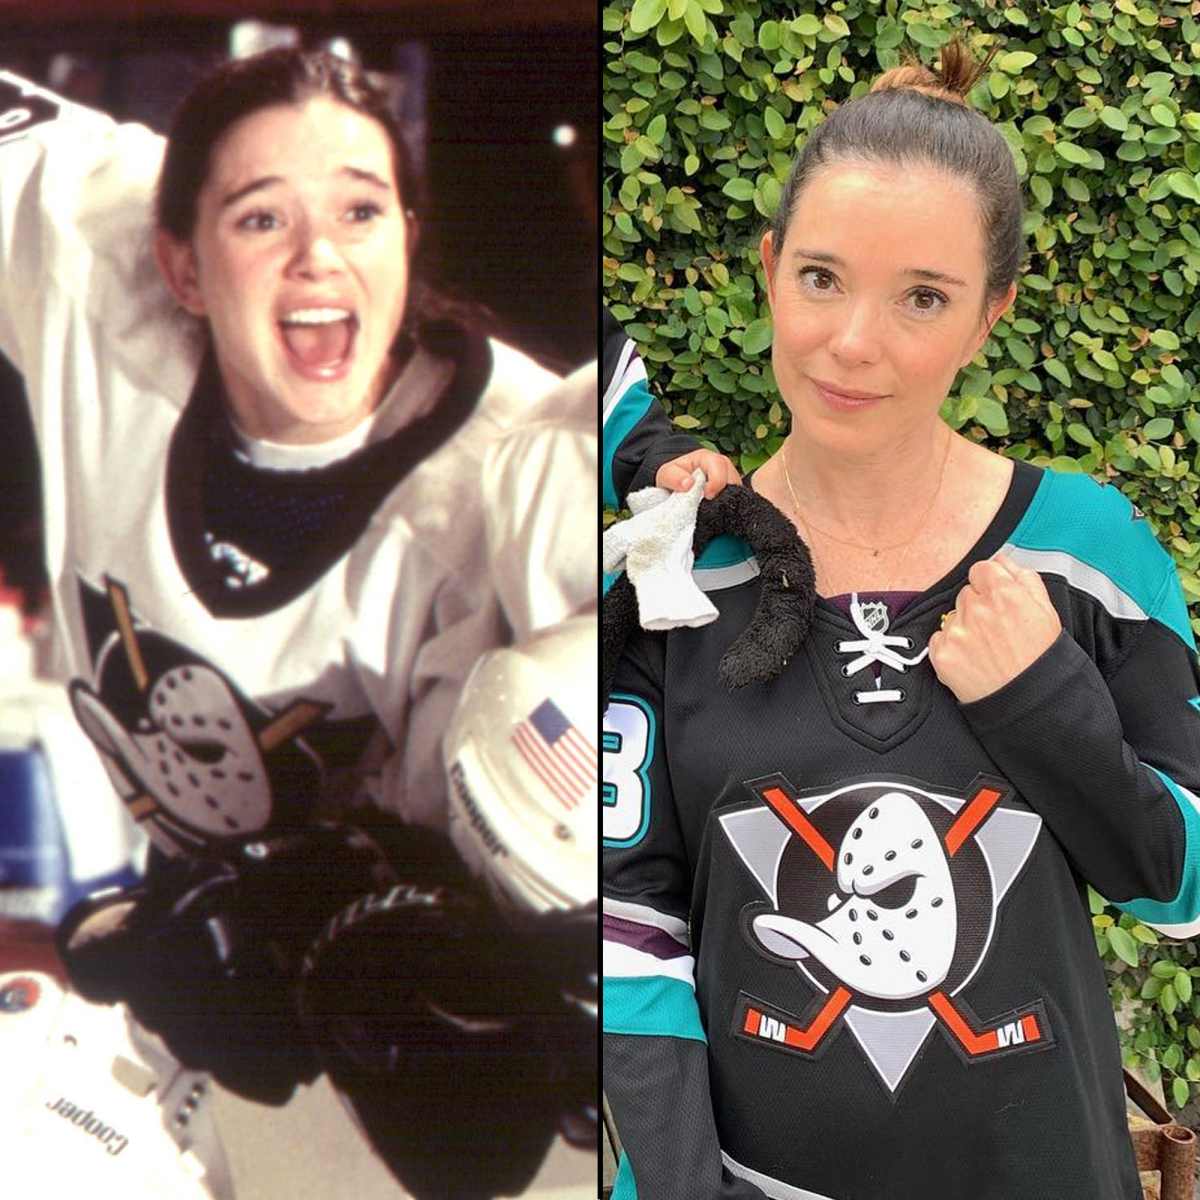 Where The Mighty Ducks cast are now… from bizarre hate crime hoax